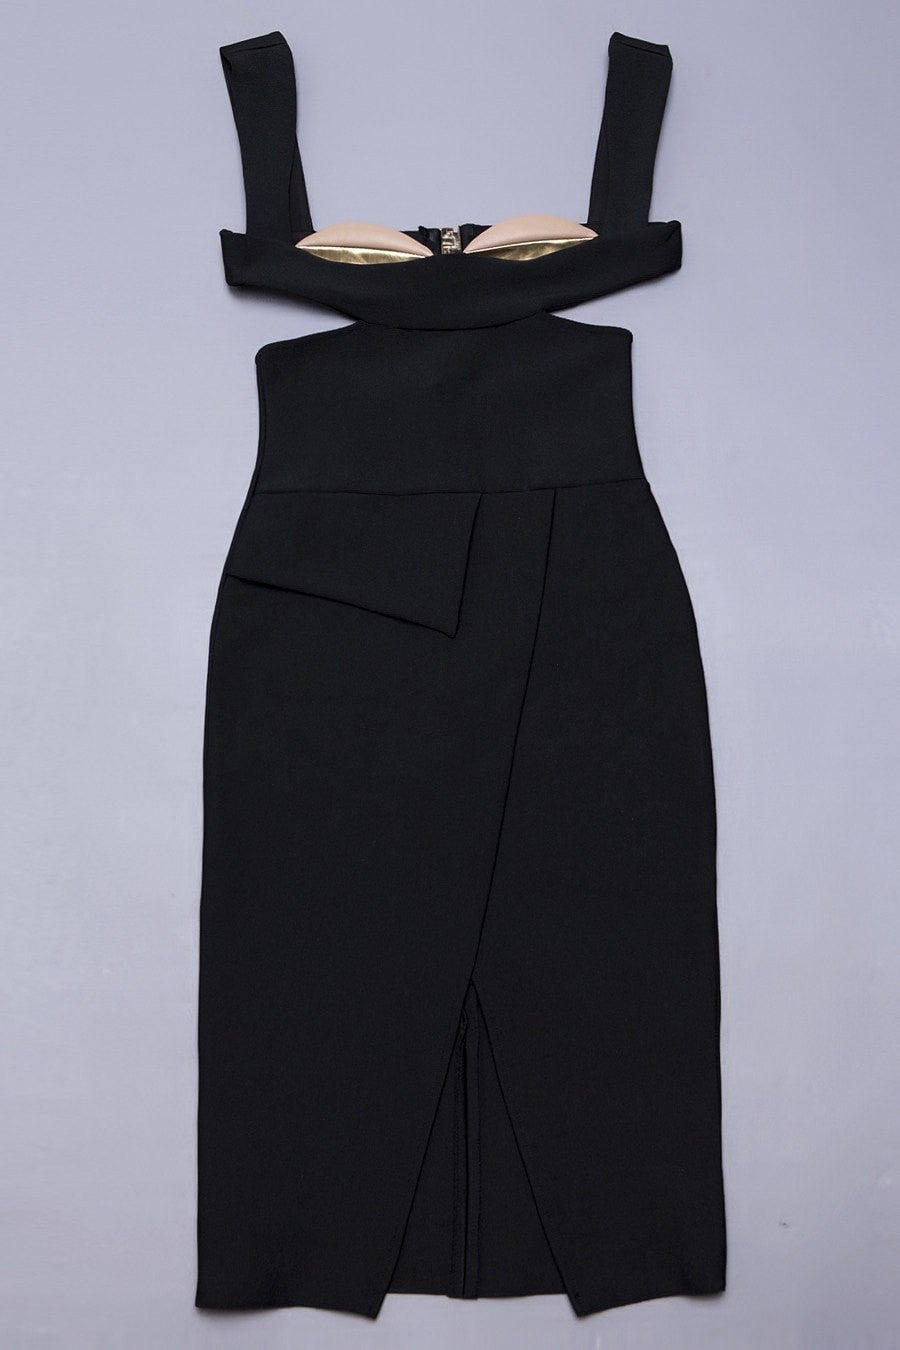 Honey Couture CARLA Designer Black Cut Out Bandage Dress Honey Couture$ AfterPay Humm ZipPay LayBuy Sezzle